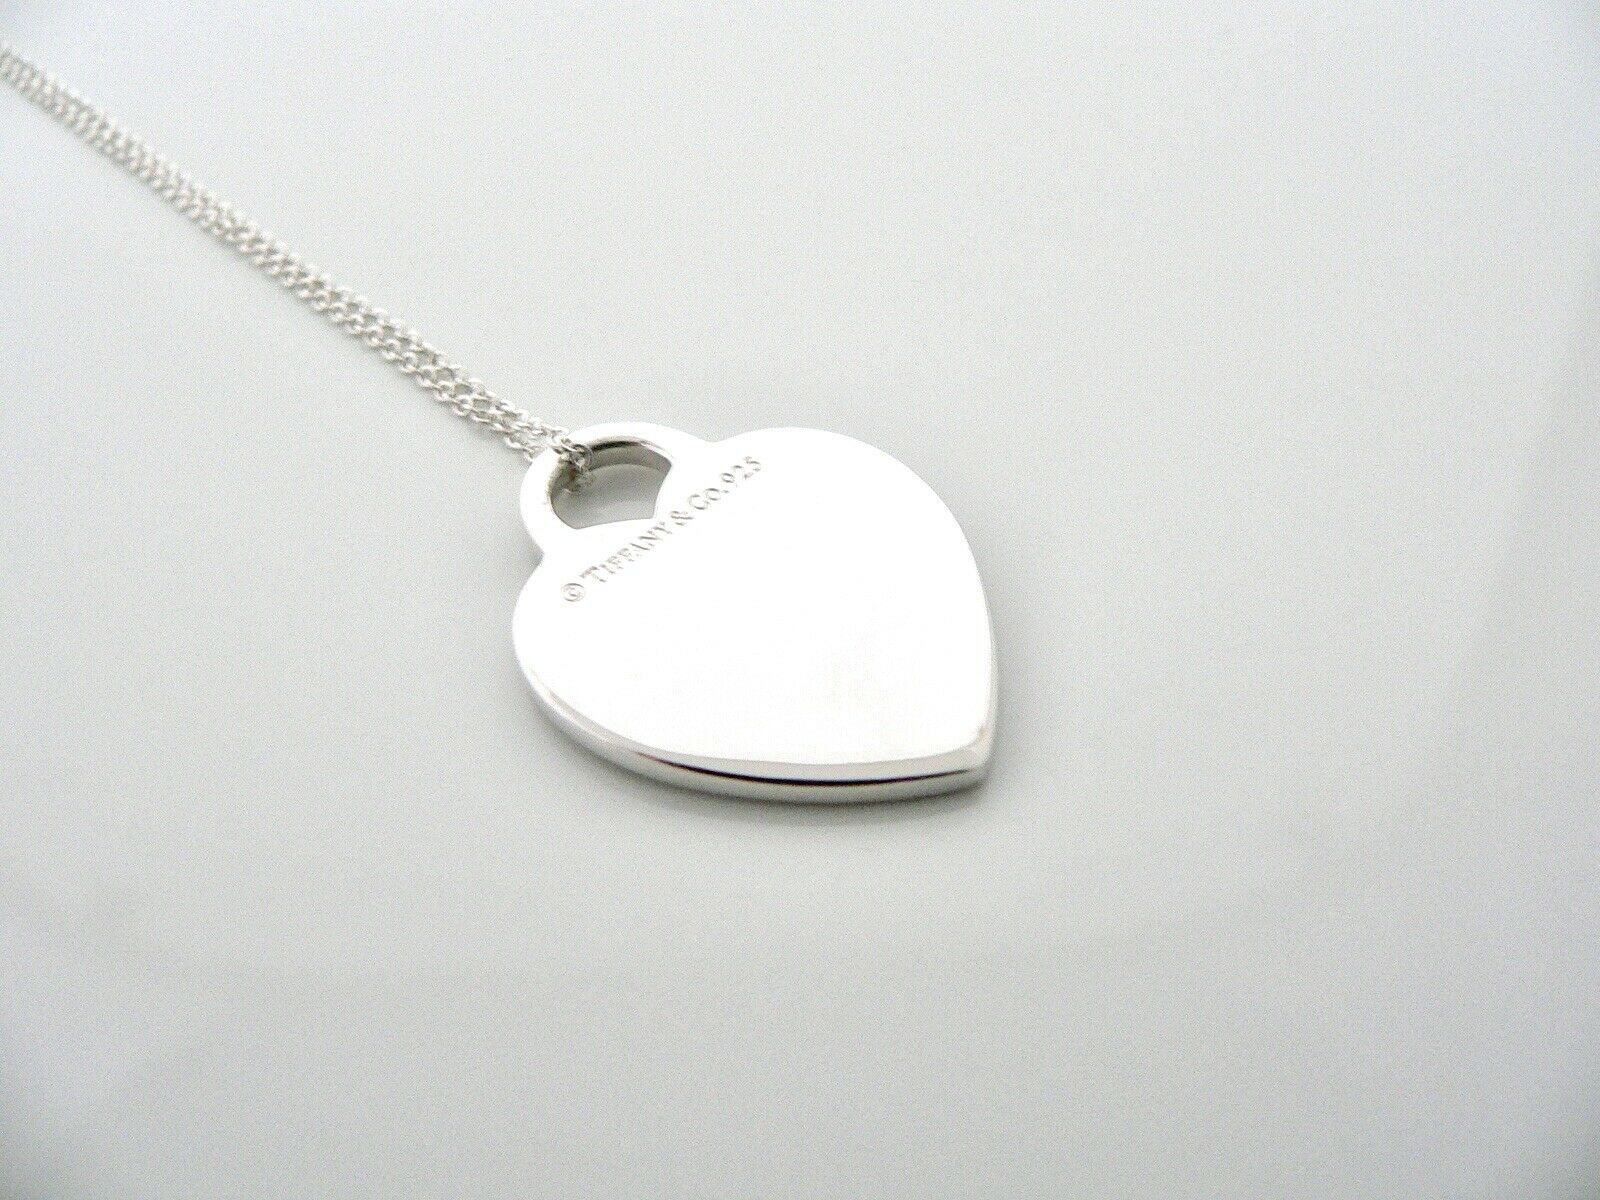 Tiffany & Co Heart Tag Necklace Pendant Charm Chain Silver Gift Love T and Co